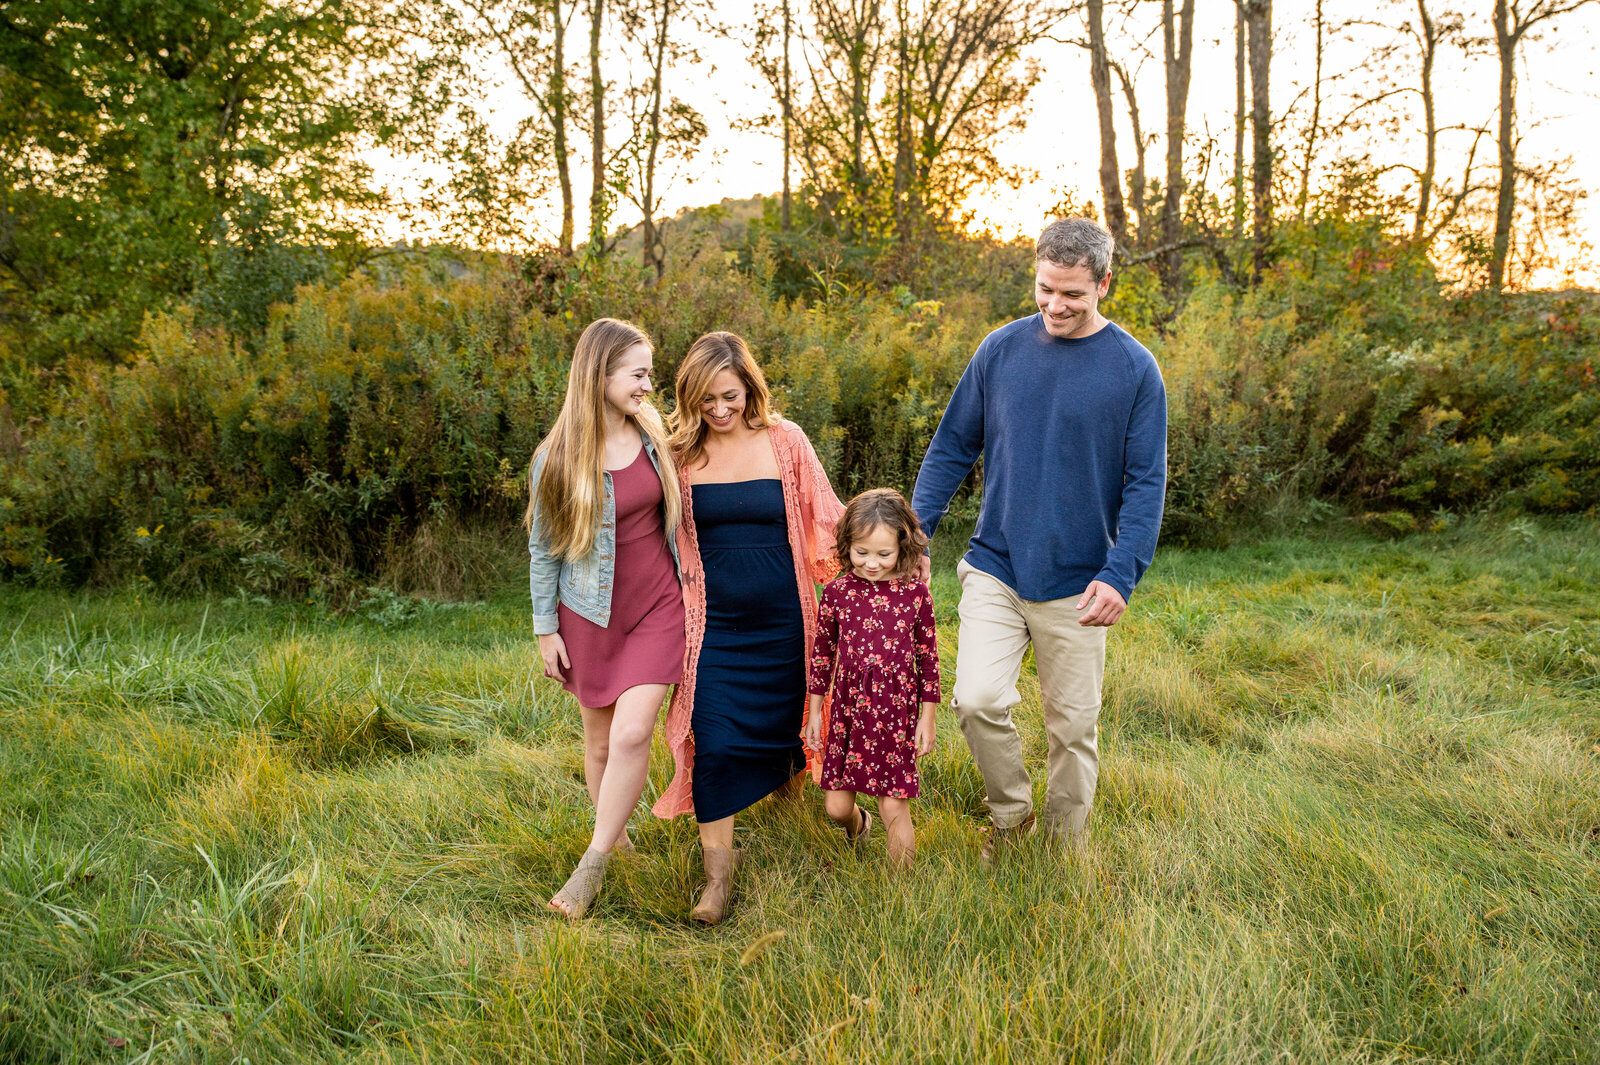 Tuscaraws county family photographer, Demi Fowler, owner of Blissfully Blurred Photography.